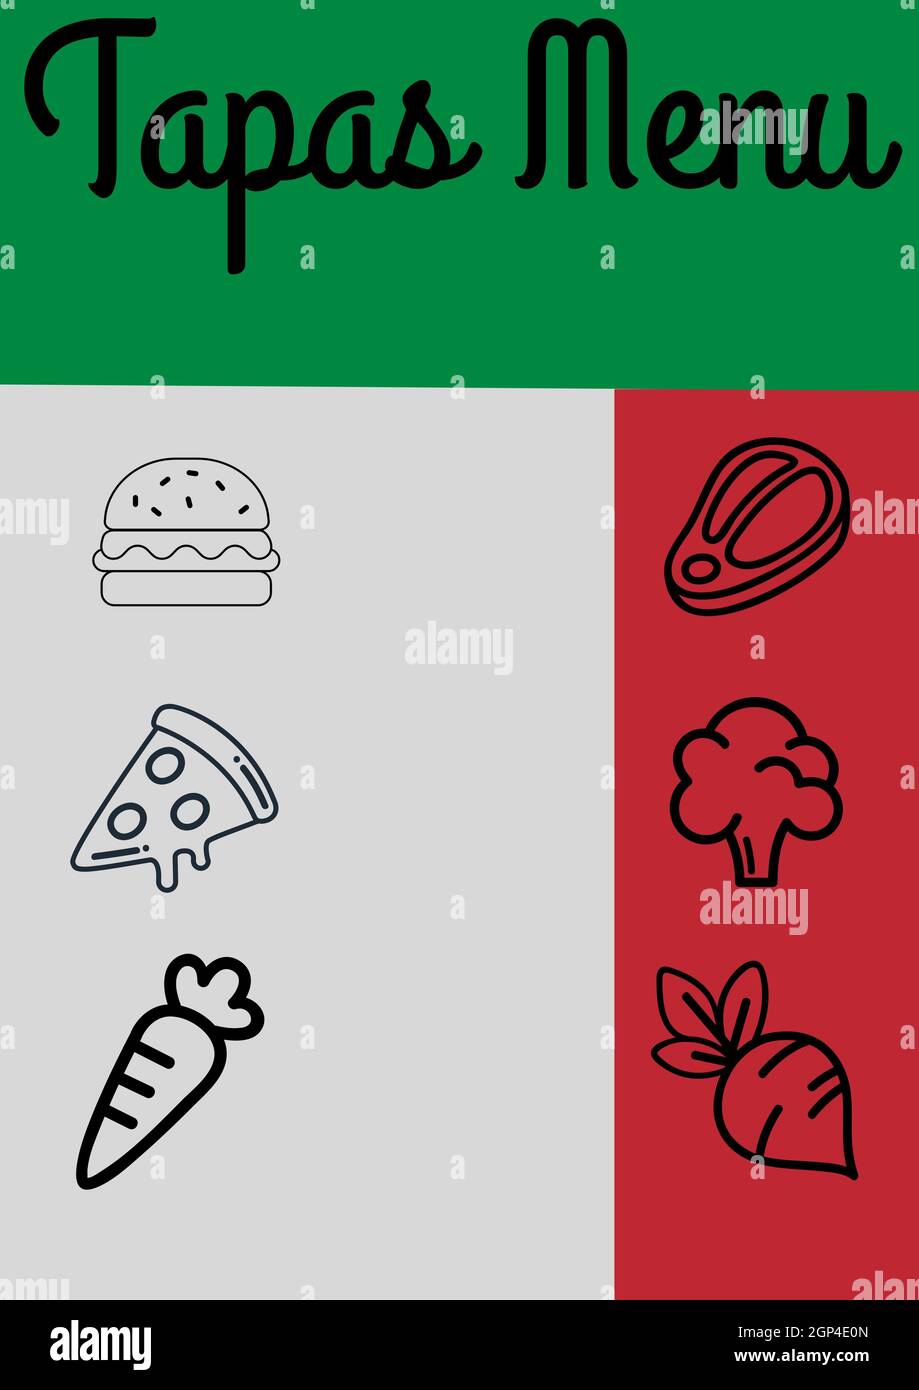 Composition of tapas menu text and fast food and vegetables icons on colourful background Stock Photo